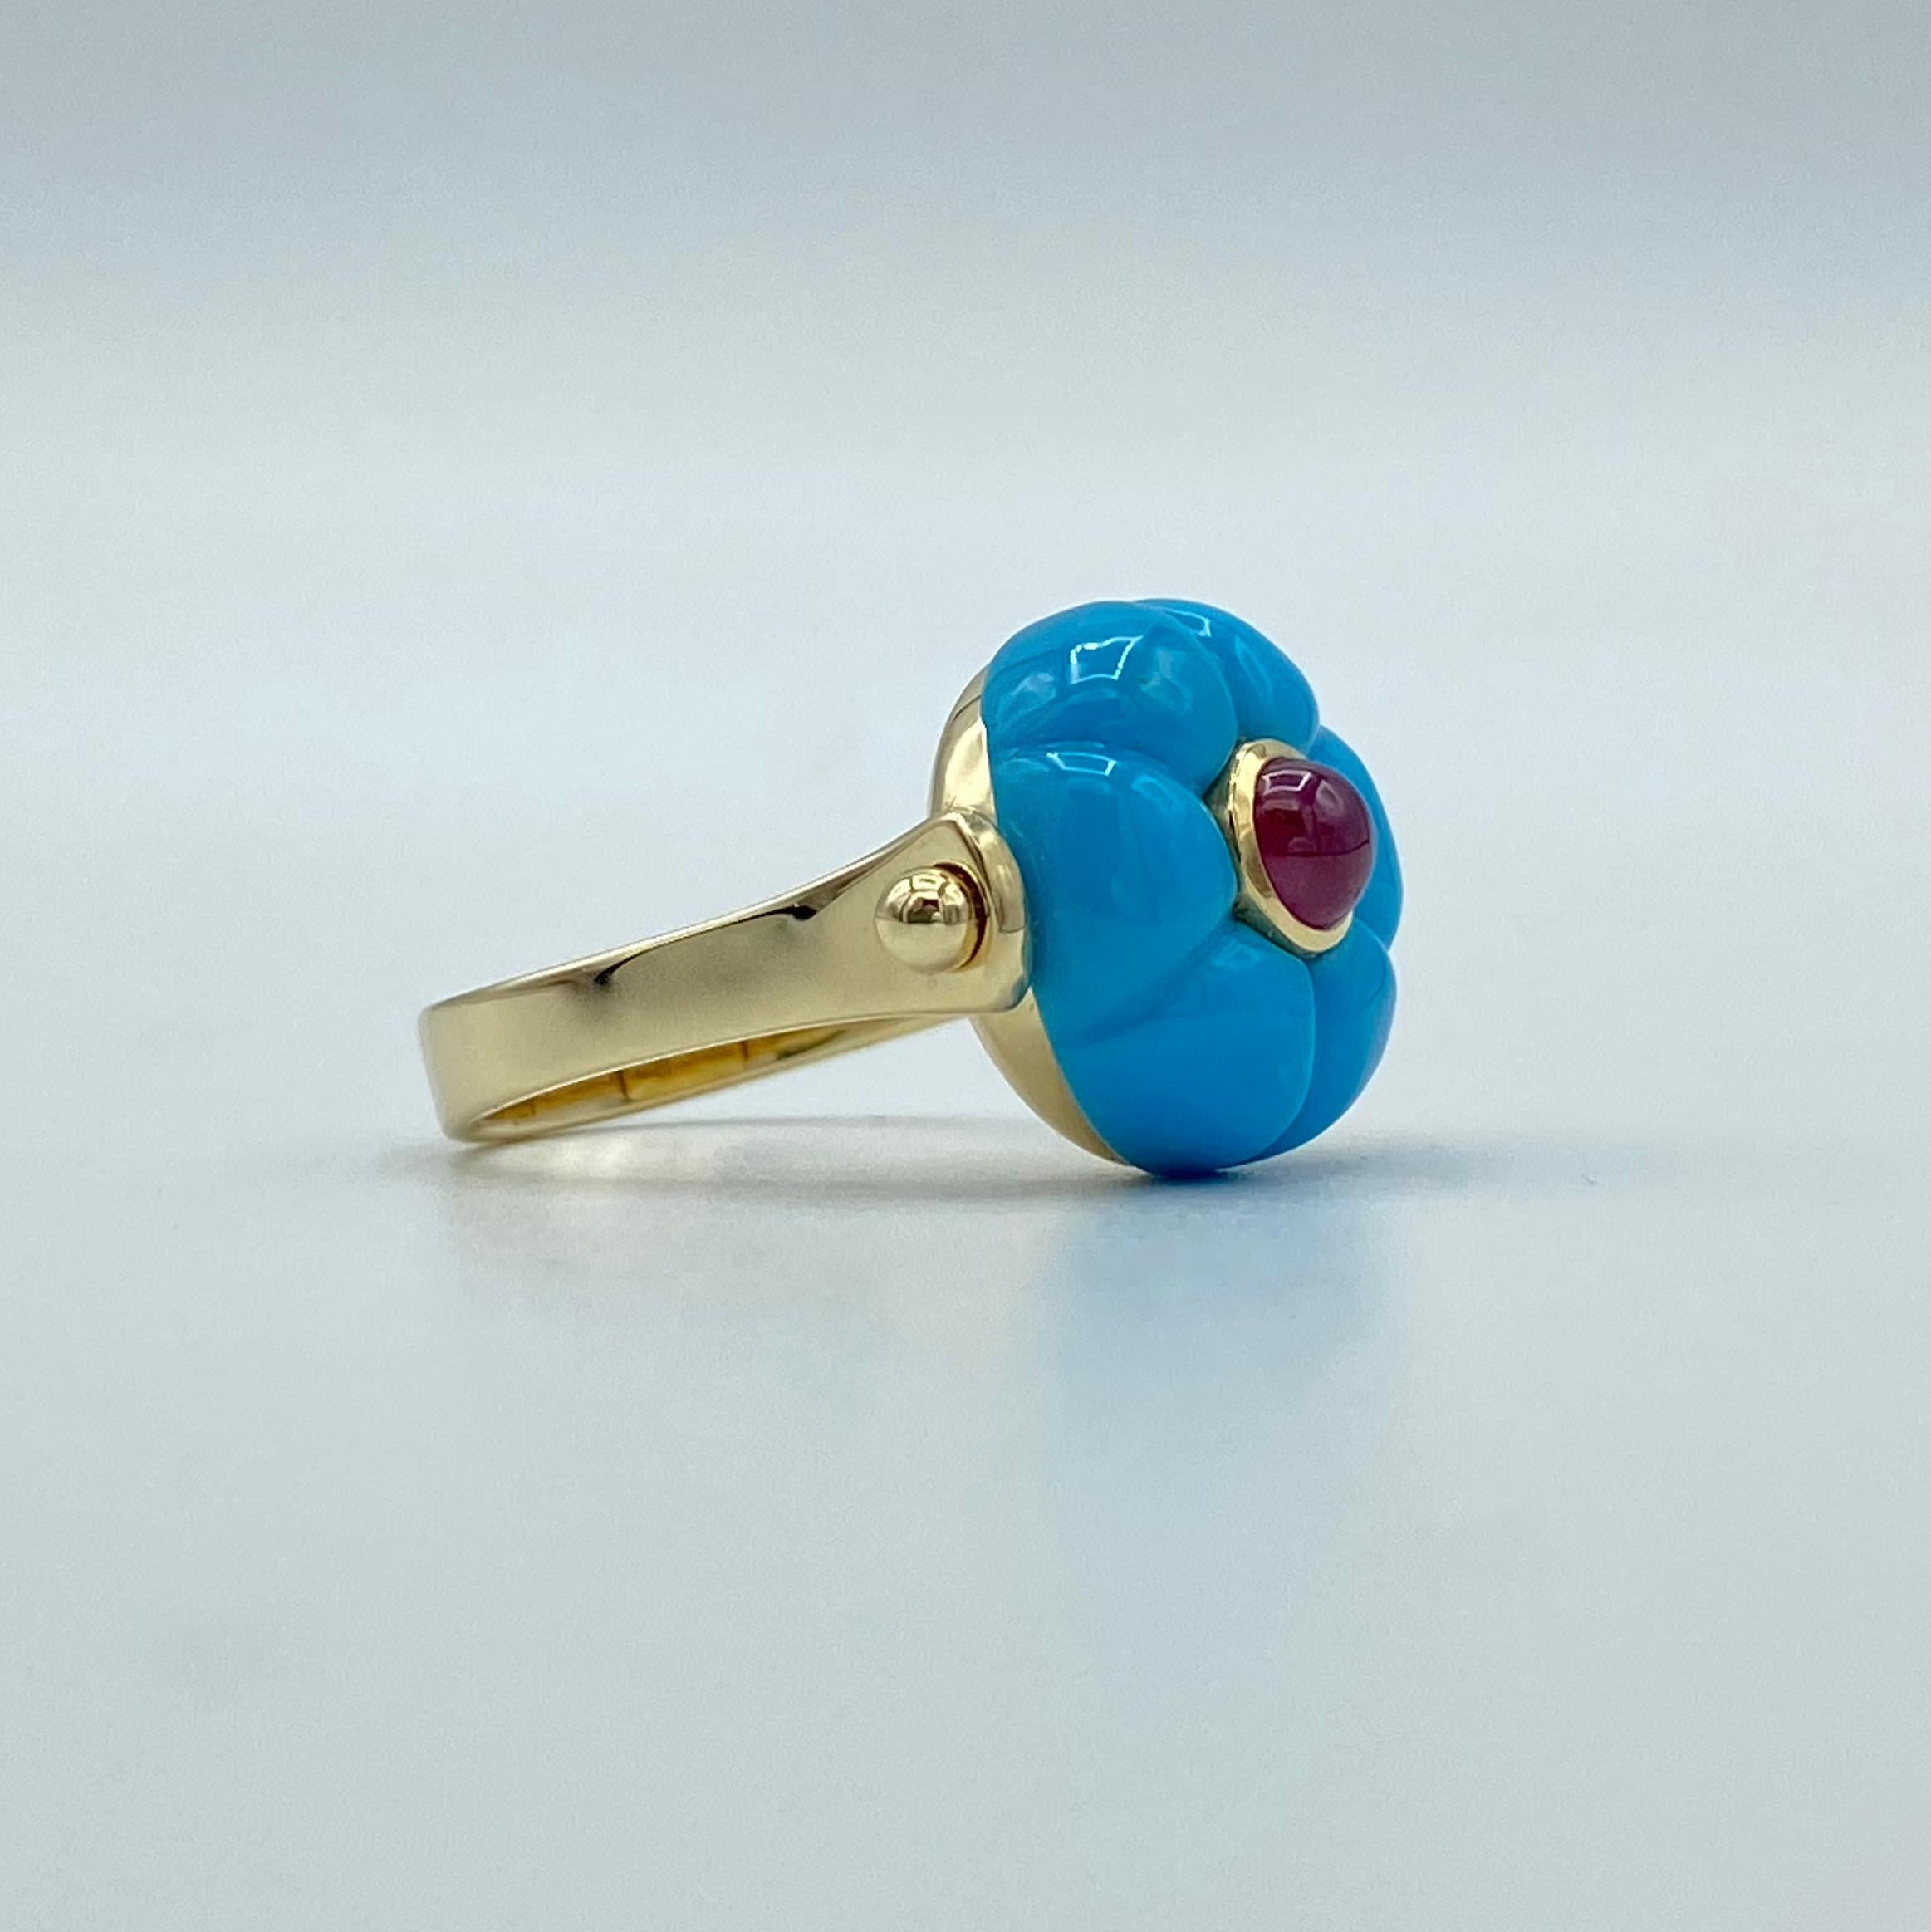 Classical Roman Made in Italy Gemstone Cabochon Ruby Turquoise 18Kt Yellow Gold Roman Style Ring